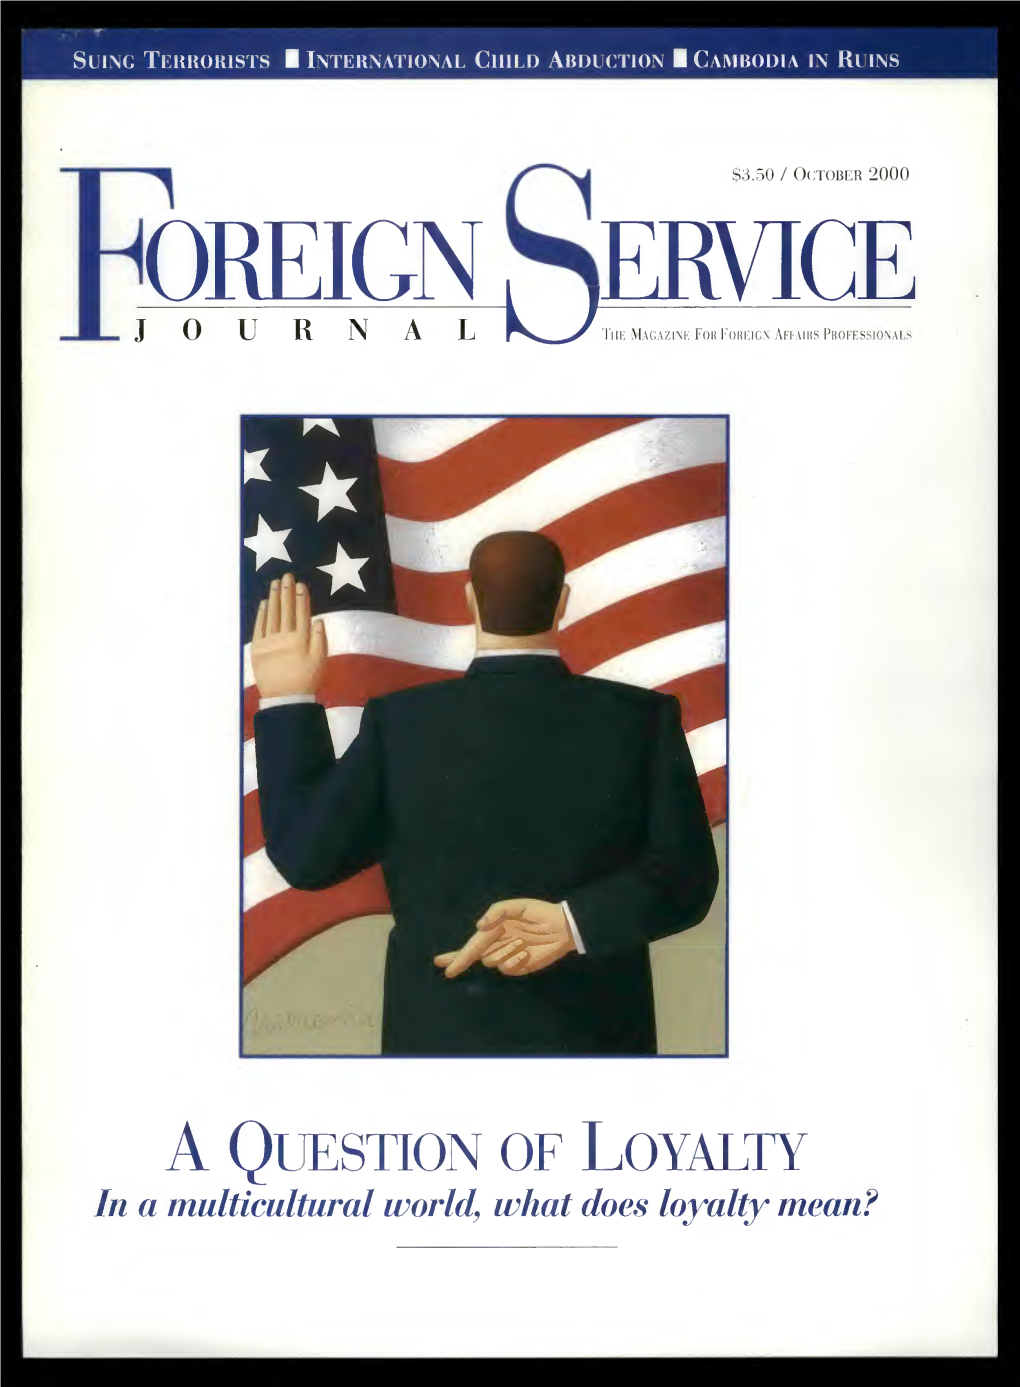 The Foreign Service Journal, October 2000